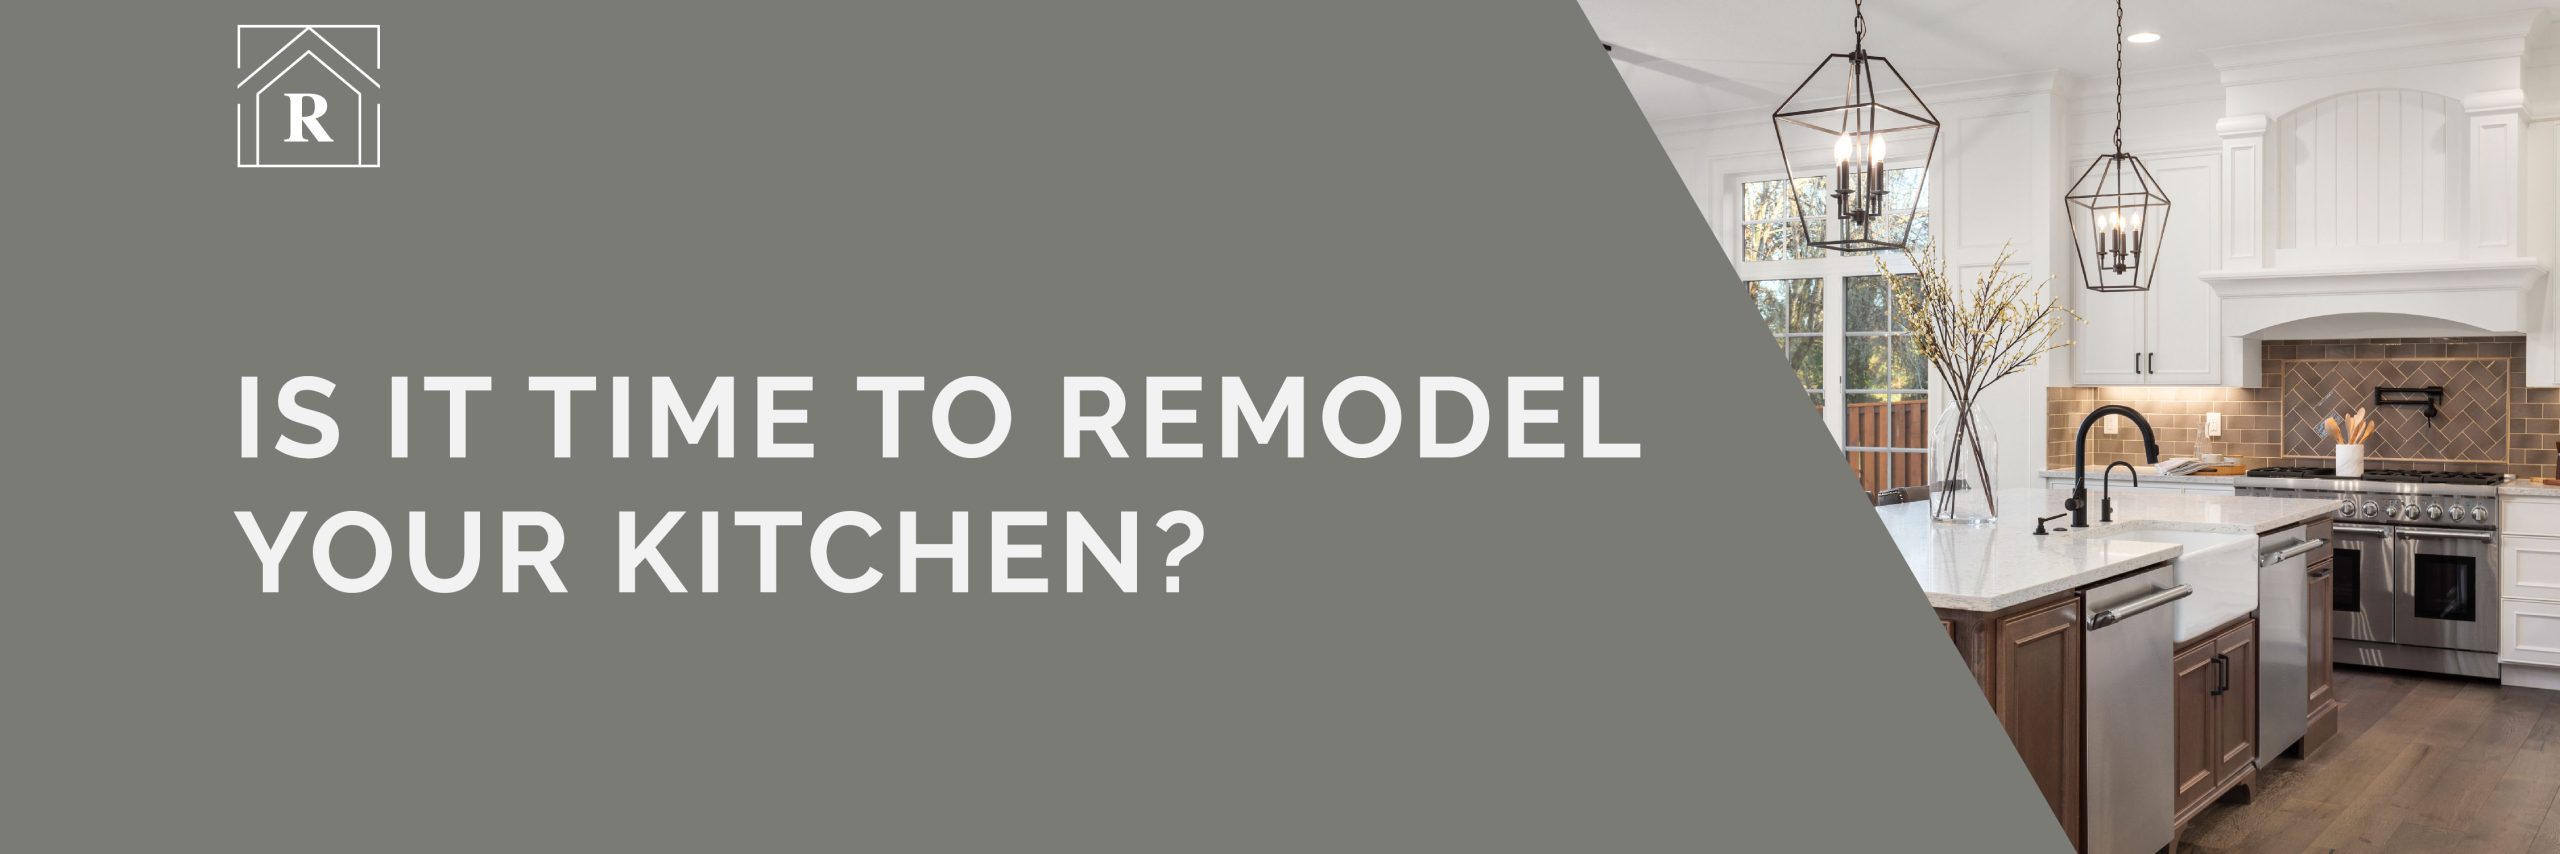 is it time to remodel your kitchen